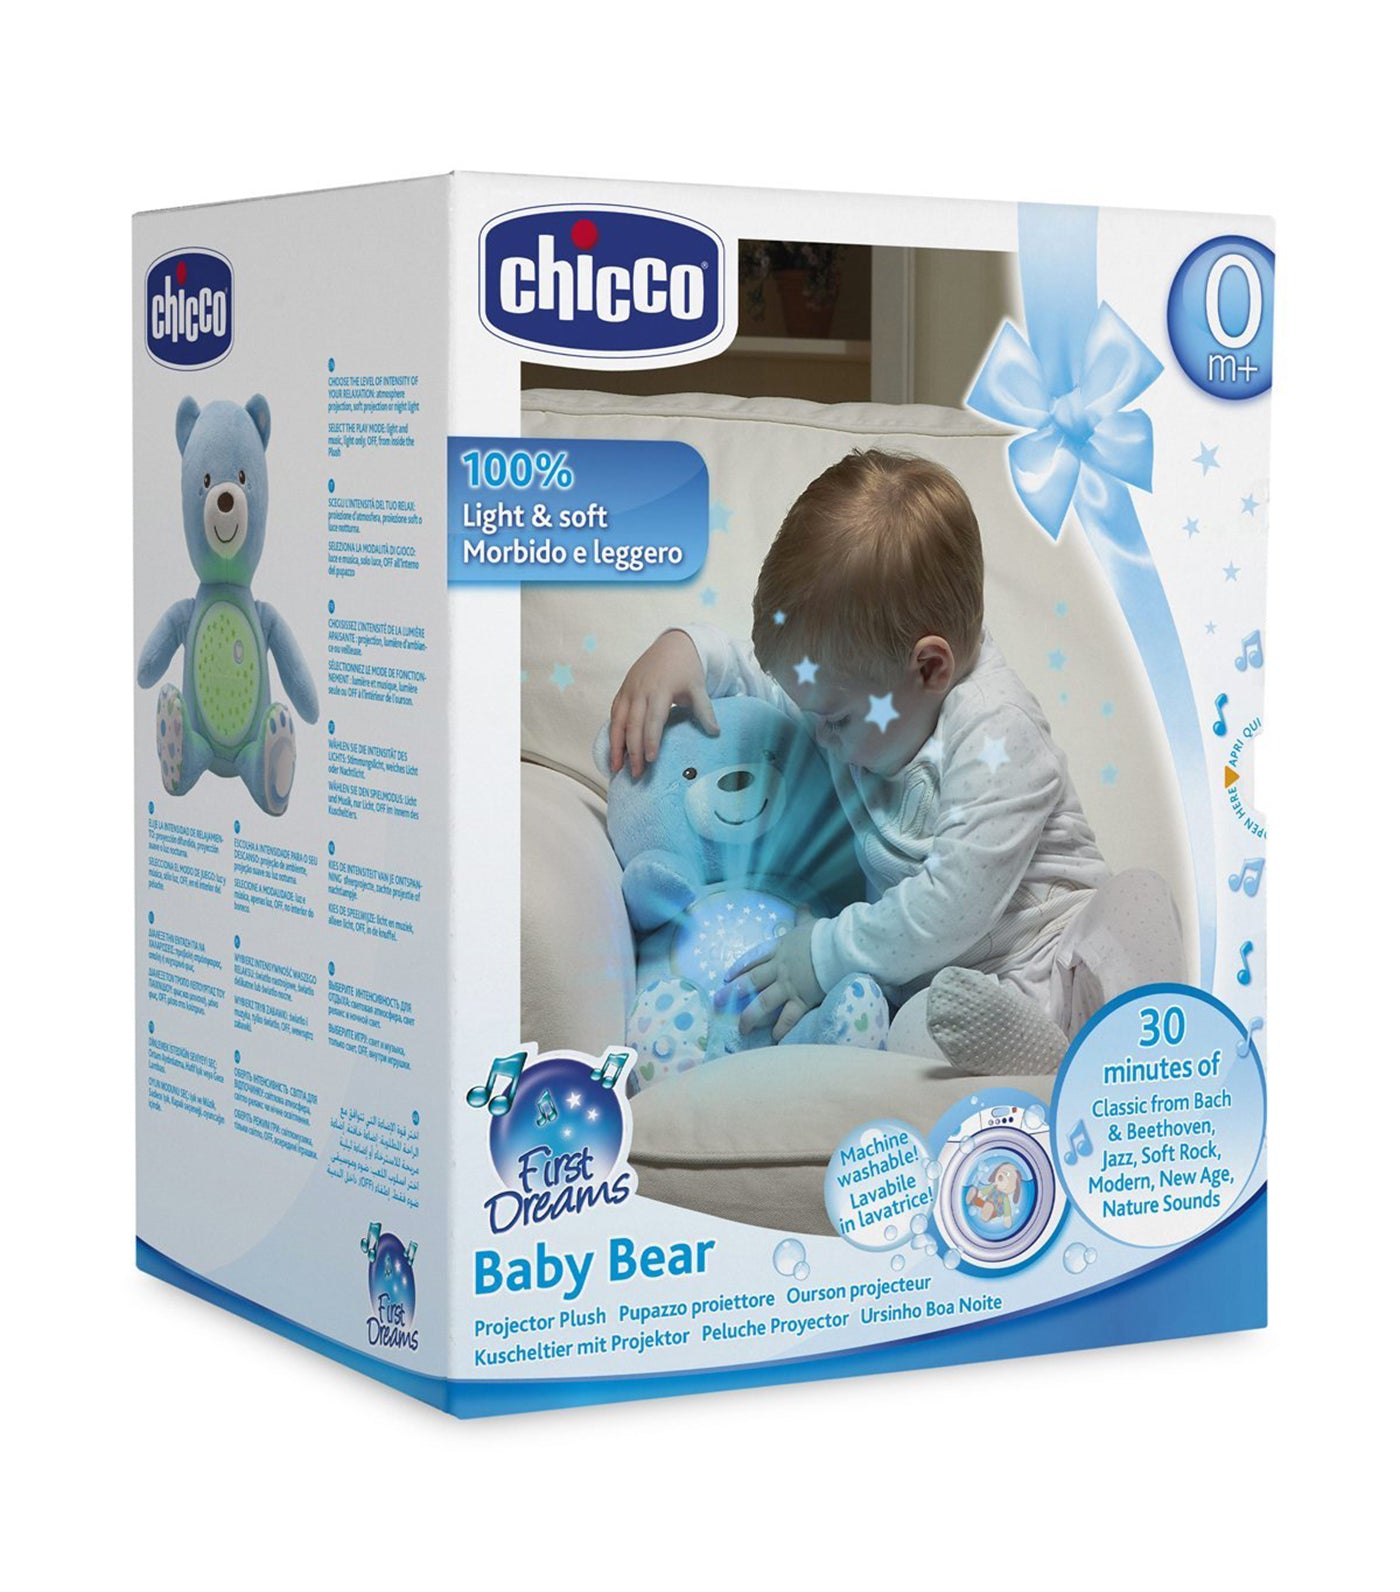 chicco blue first dreams baby bear 